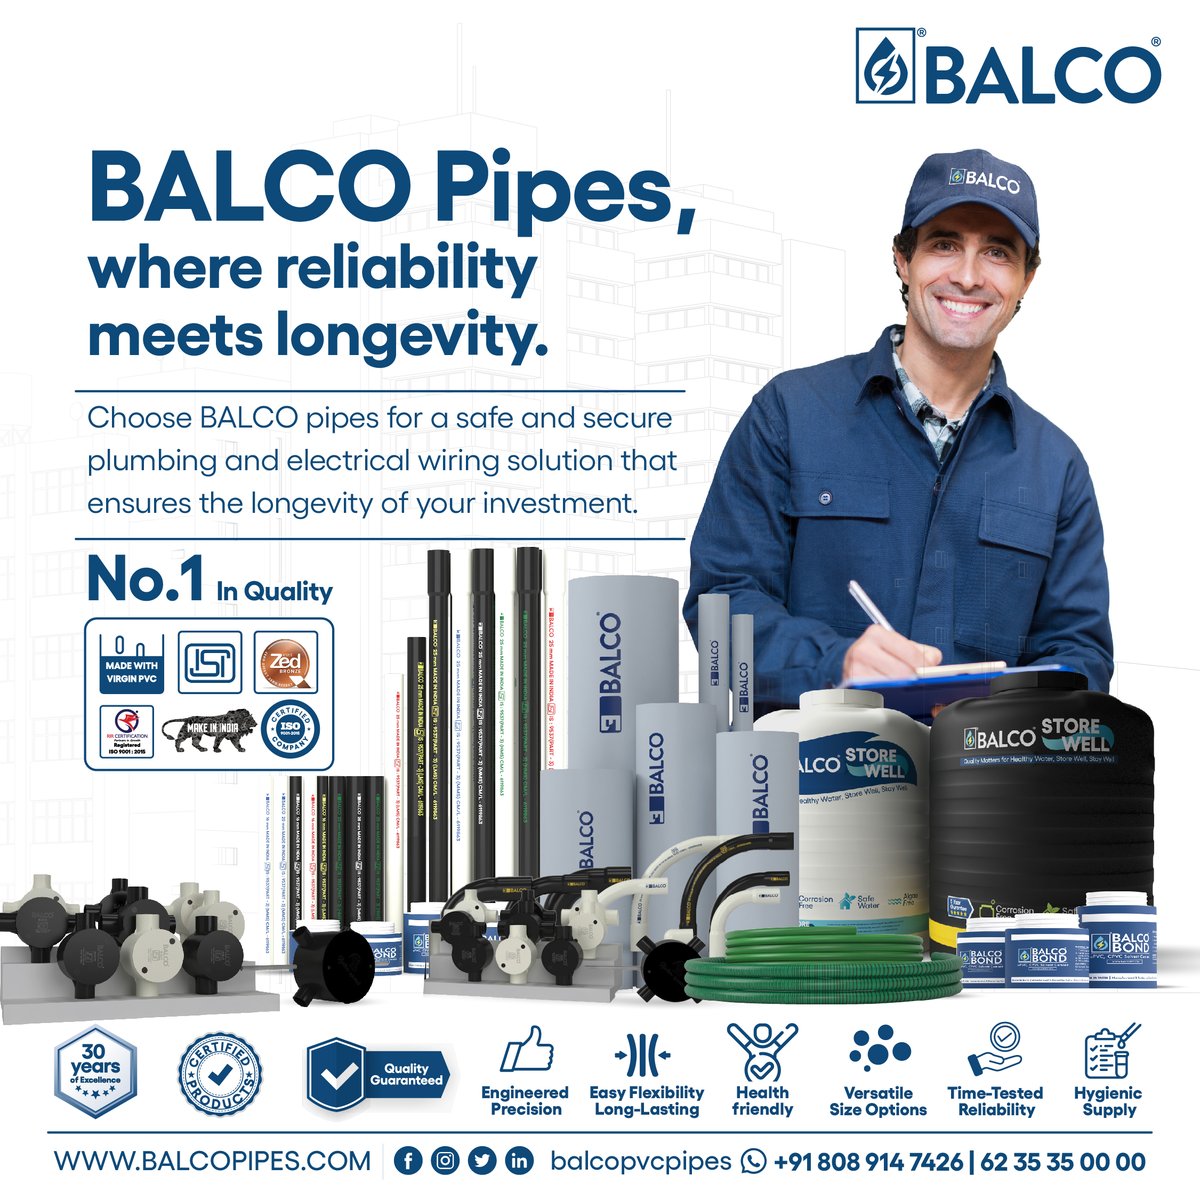 Invest Wisely, Invest in Quality! Choose BALCO pipes for a safe and secure plumbing and electrical wiring solution that ensures the longevity of your investment. 🏡✨ #BALCOPipes #ConstructionEssentials #QualityInvestment #balco #pvc #conduits #plumbing #electrical #safetyfirst